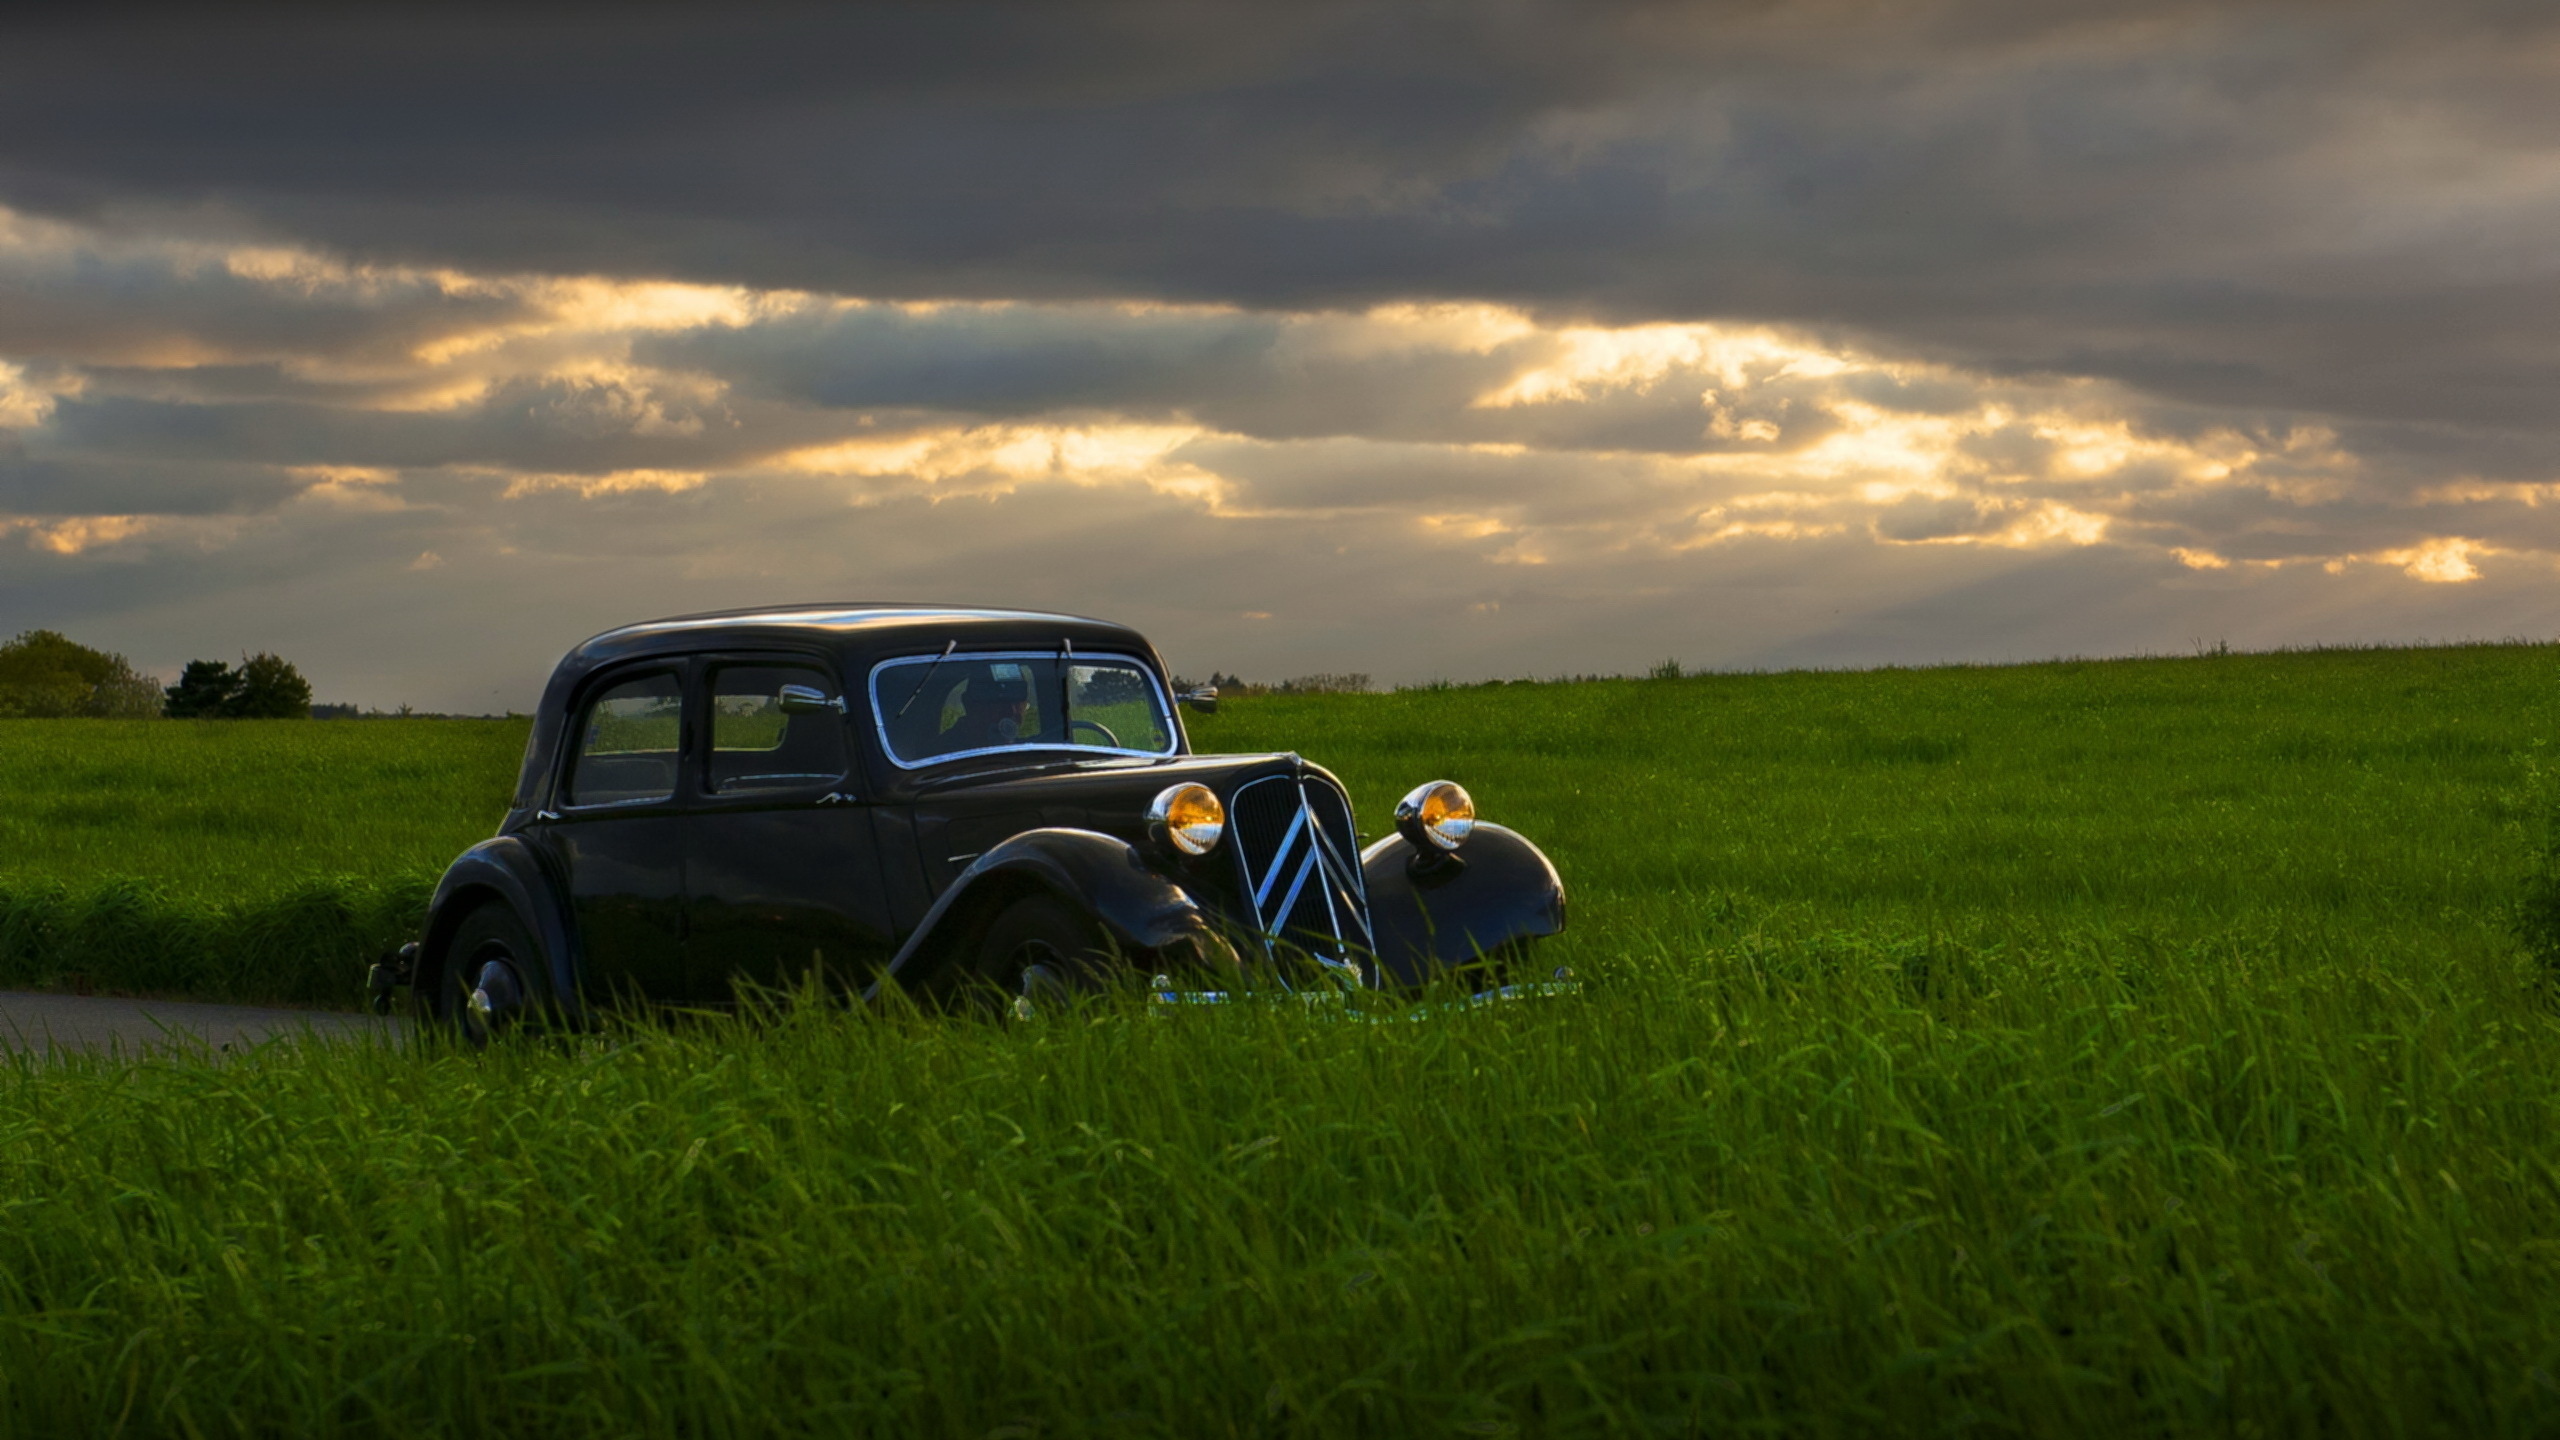 General 2560x1440 car retro style field sunset Citroën French Cars